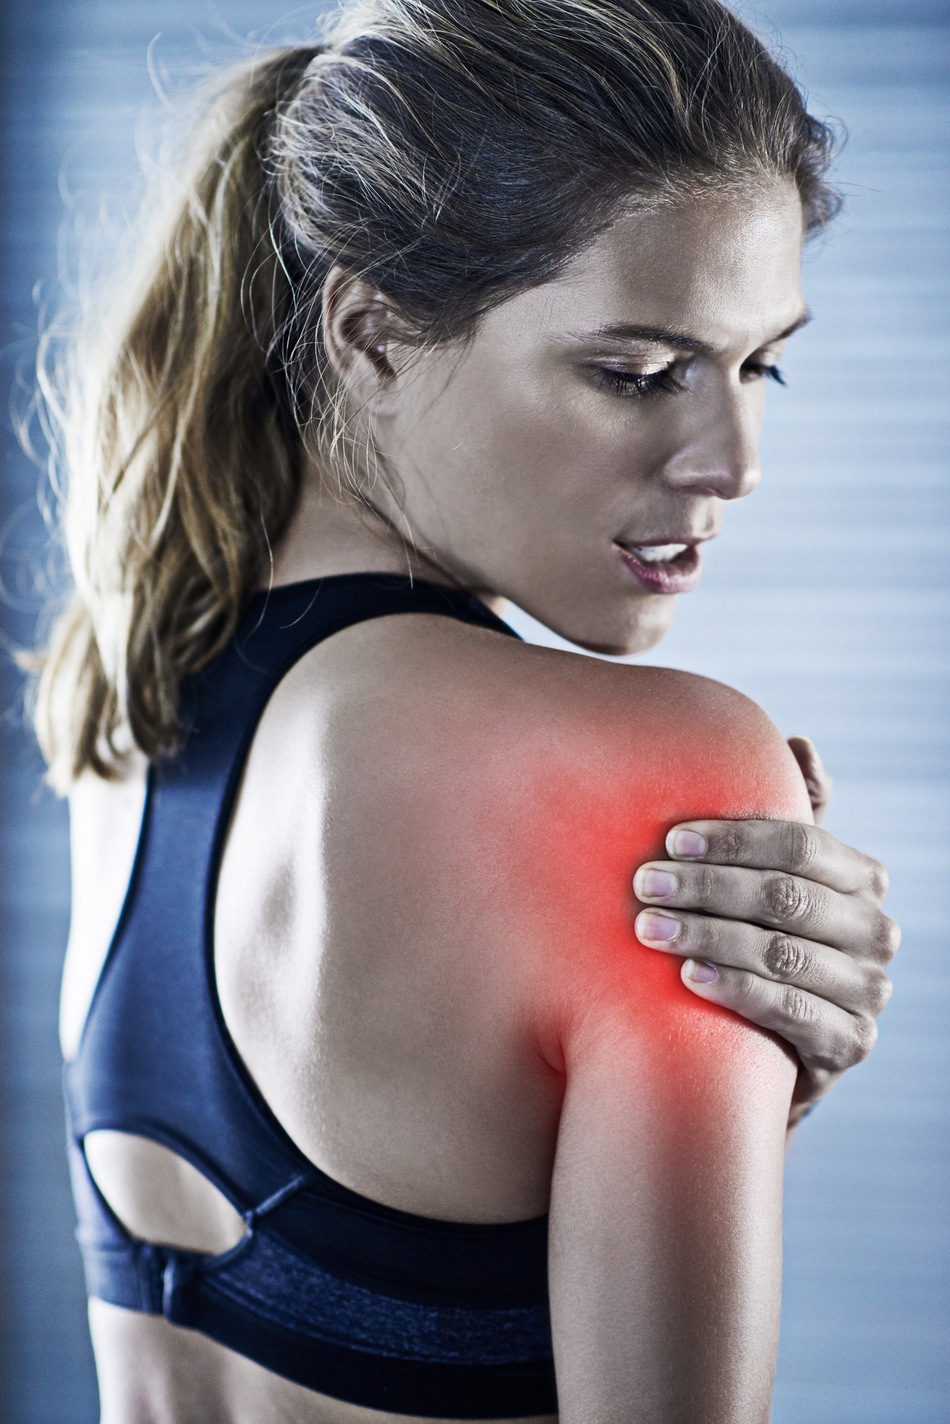 Treating Dislocated Shoulders in Athletes